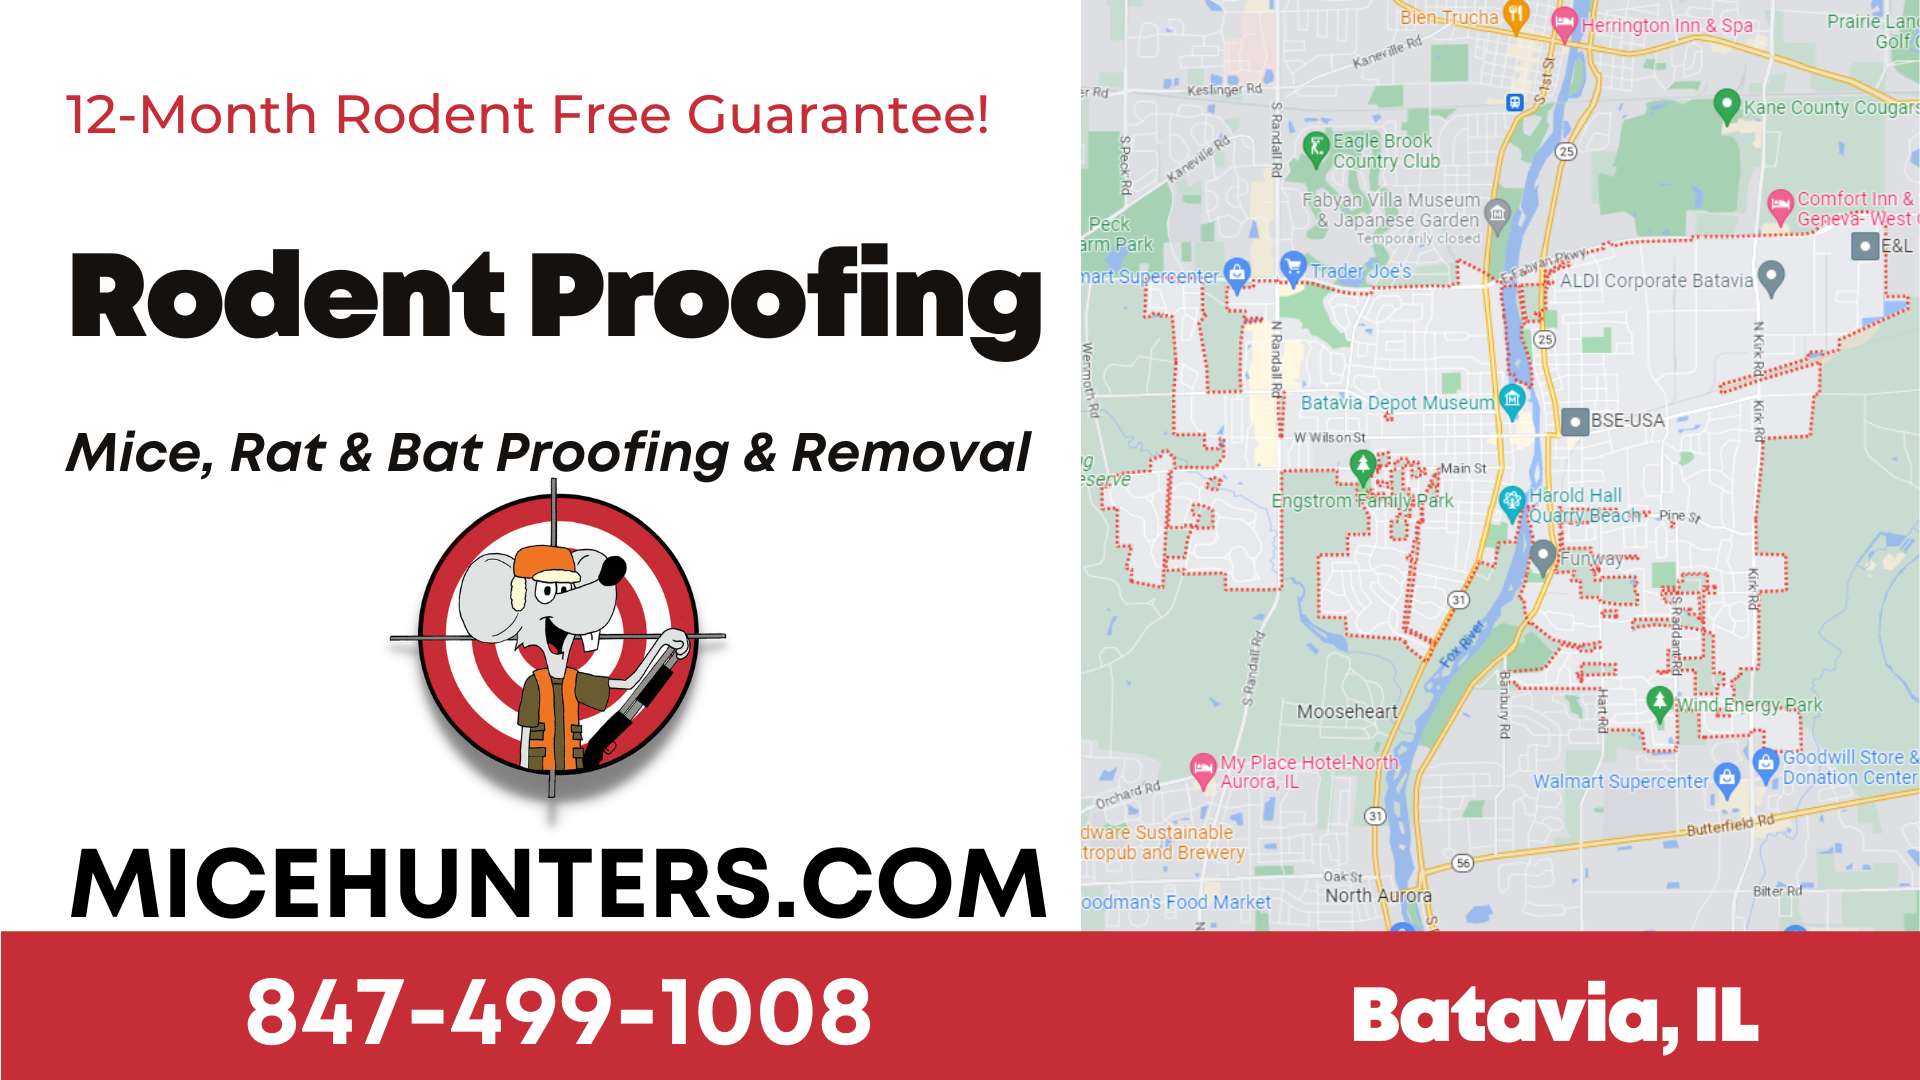 Batavia IL Mouse and Rodent Extermination and Proofing Services Near Me